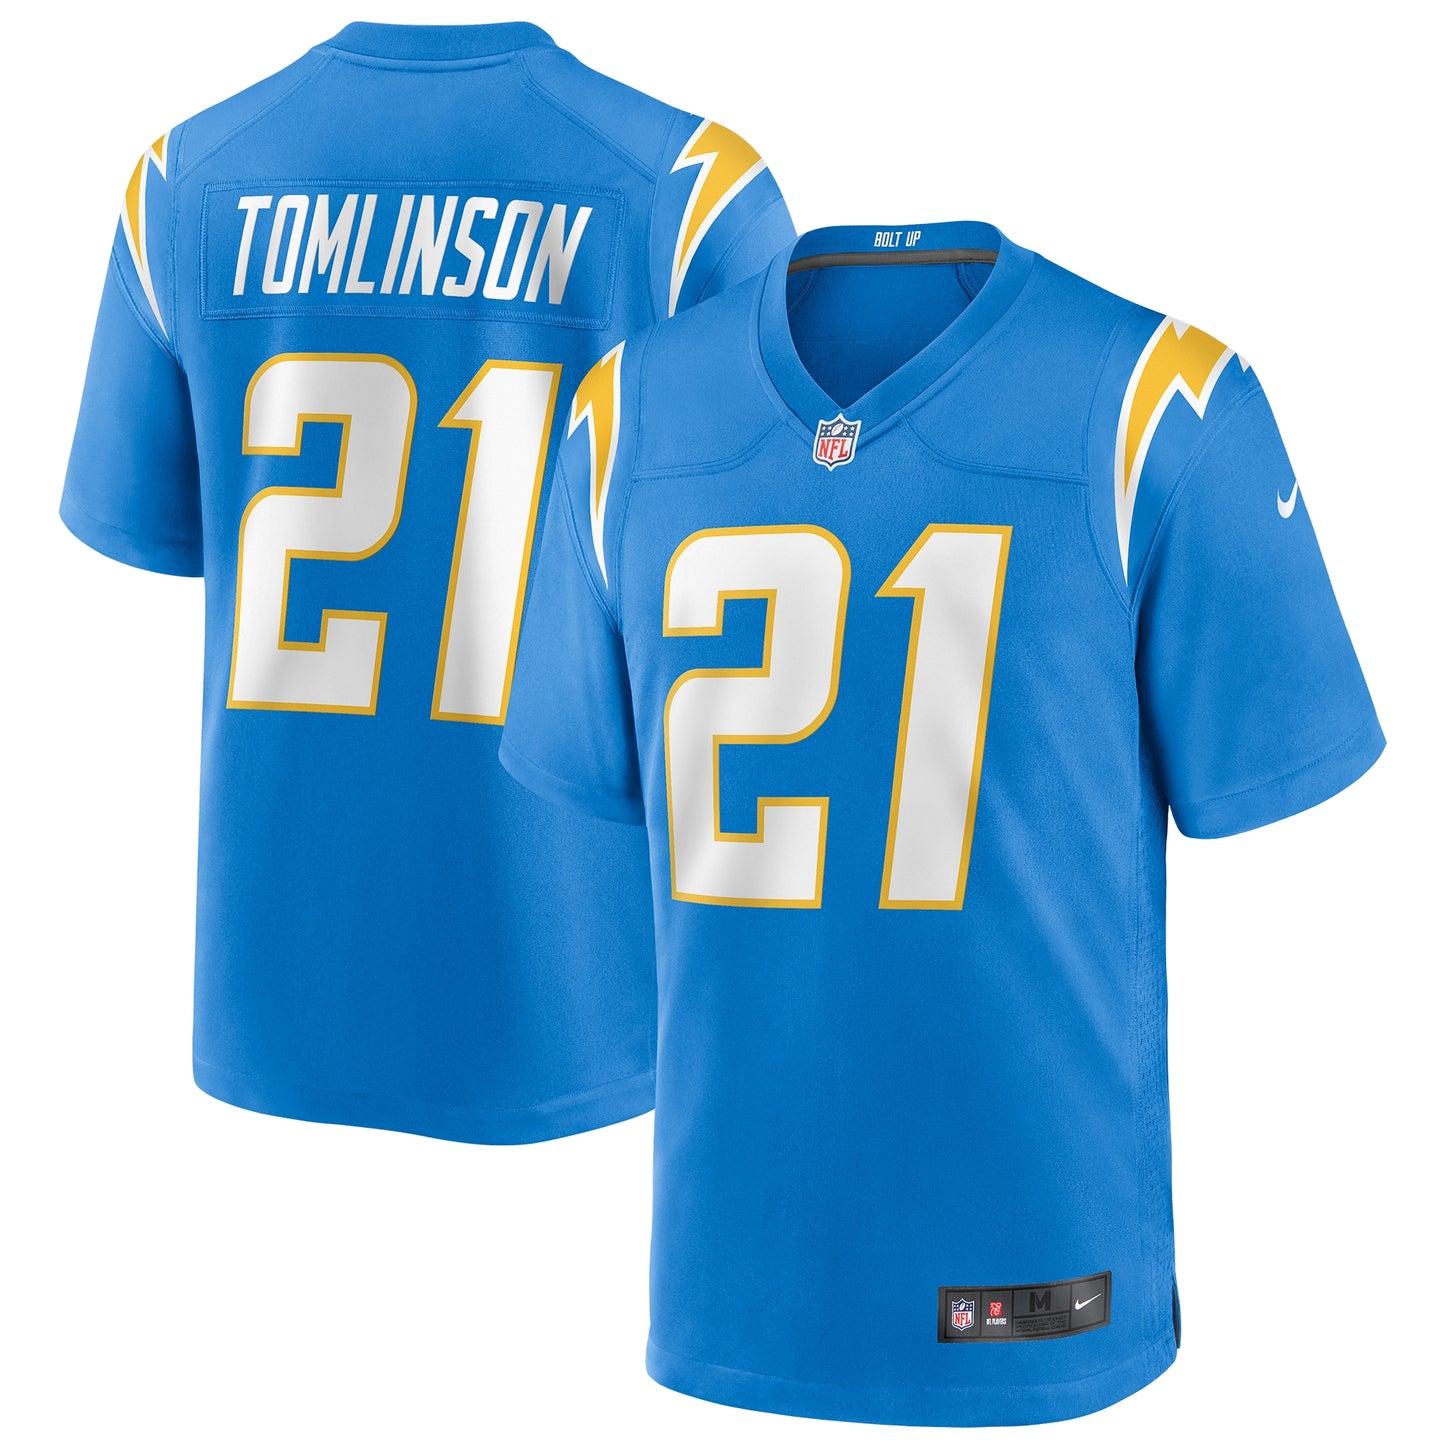 LaDainian Tomlinson Los Angeles Chargers Nike Game Retired Player Jersey - Powder Blue